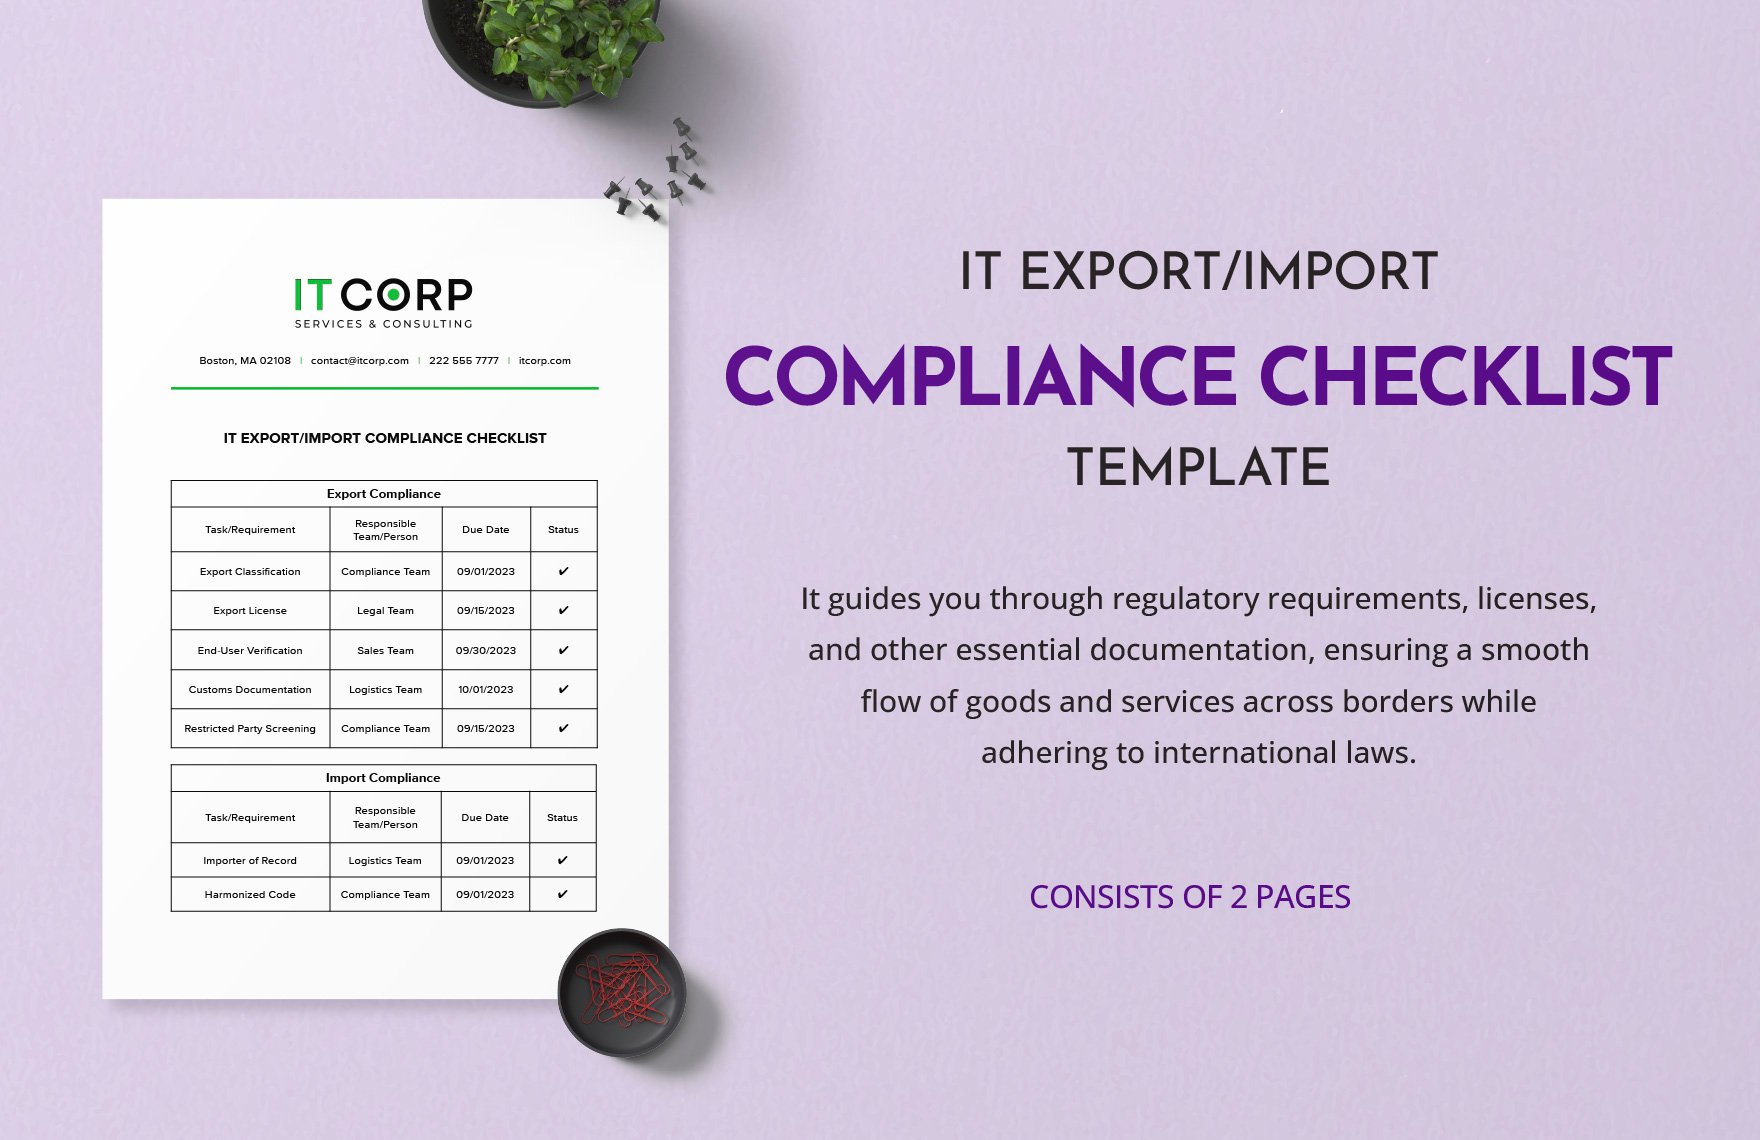 IT Export/Import Compliance Checklist Template